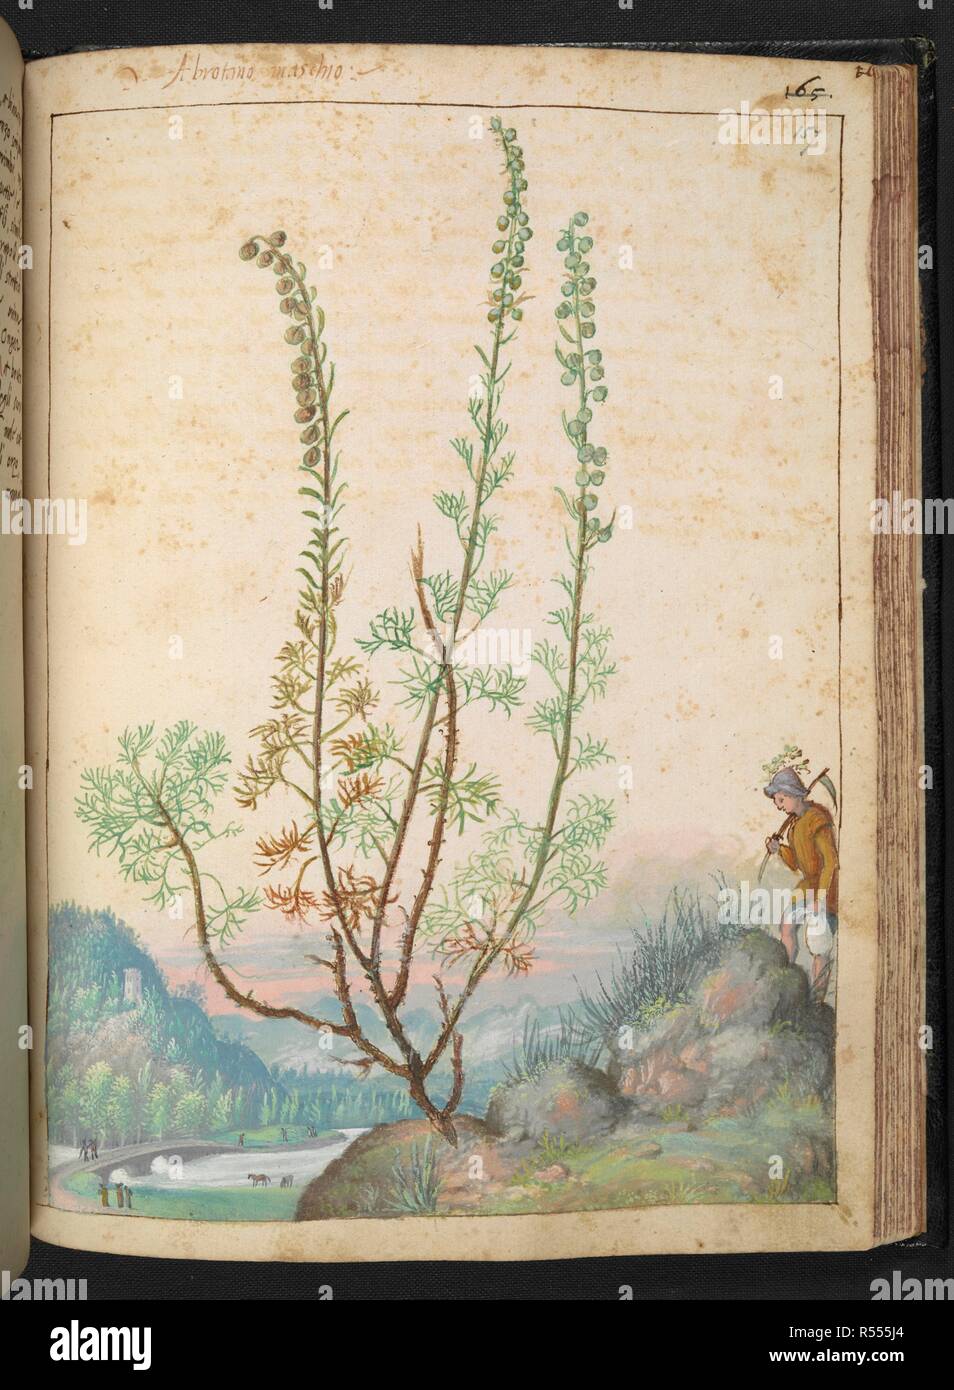 AbrÃ³tano maschio. Artemisia abrotanum (southernwood, lad's love, southern wormwood) is a species of flowering plants in the sunflower family. . Coloured drawings of plants, copied from nature in the Roman States, by Gerardo Cibo. Vol. I. Pietro Andrea Mattioli, Physician, of Siena: Extracts from his edition of Dioscorides' 'de re Medica':. Italy, c. 1564-1584. Source: Add. 22332 f.157. Language: Italian. Author: Cibo, Gheraldo. Stock Photo